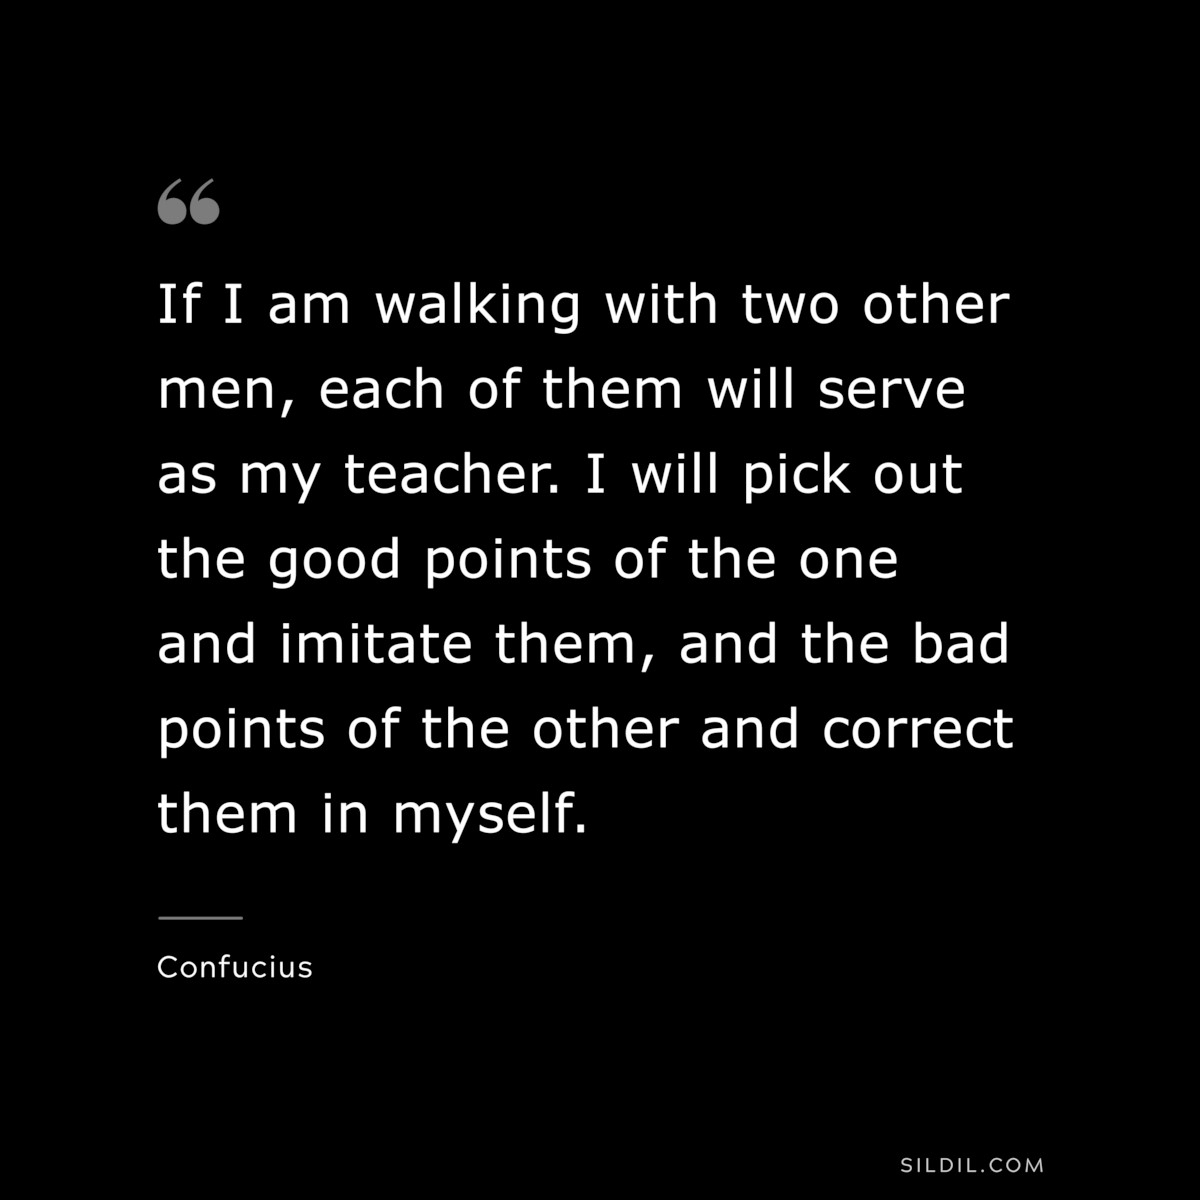 If I am walking with two other men, each of them will serve as my teacher. I will pick out the good points of the one and imitate them, and the bad points of the other and correct them in myself. ― Confucius